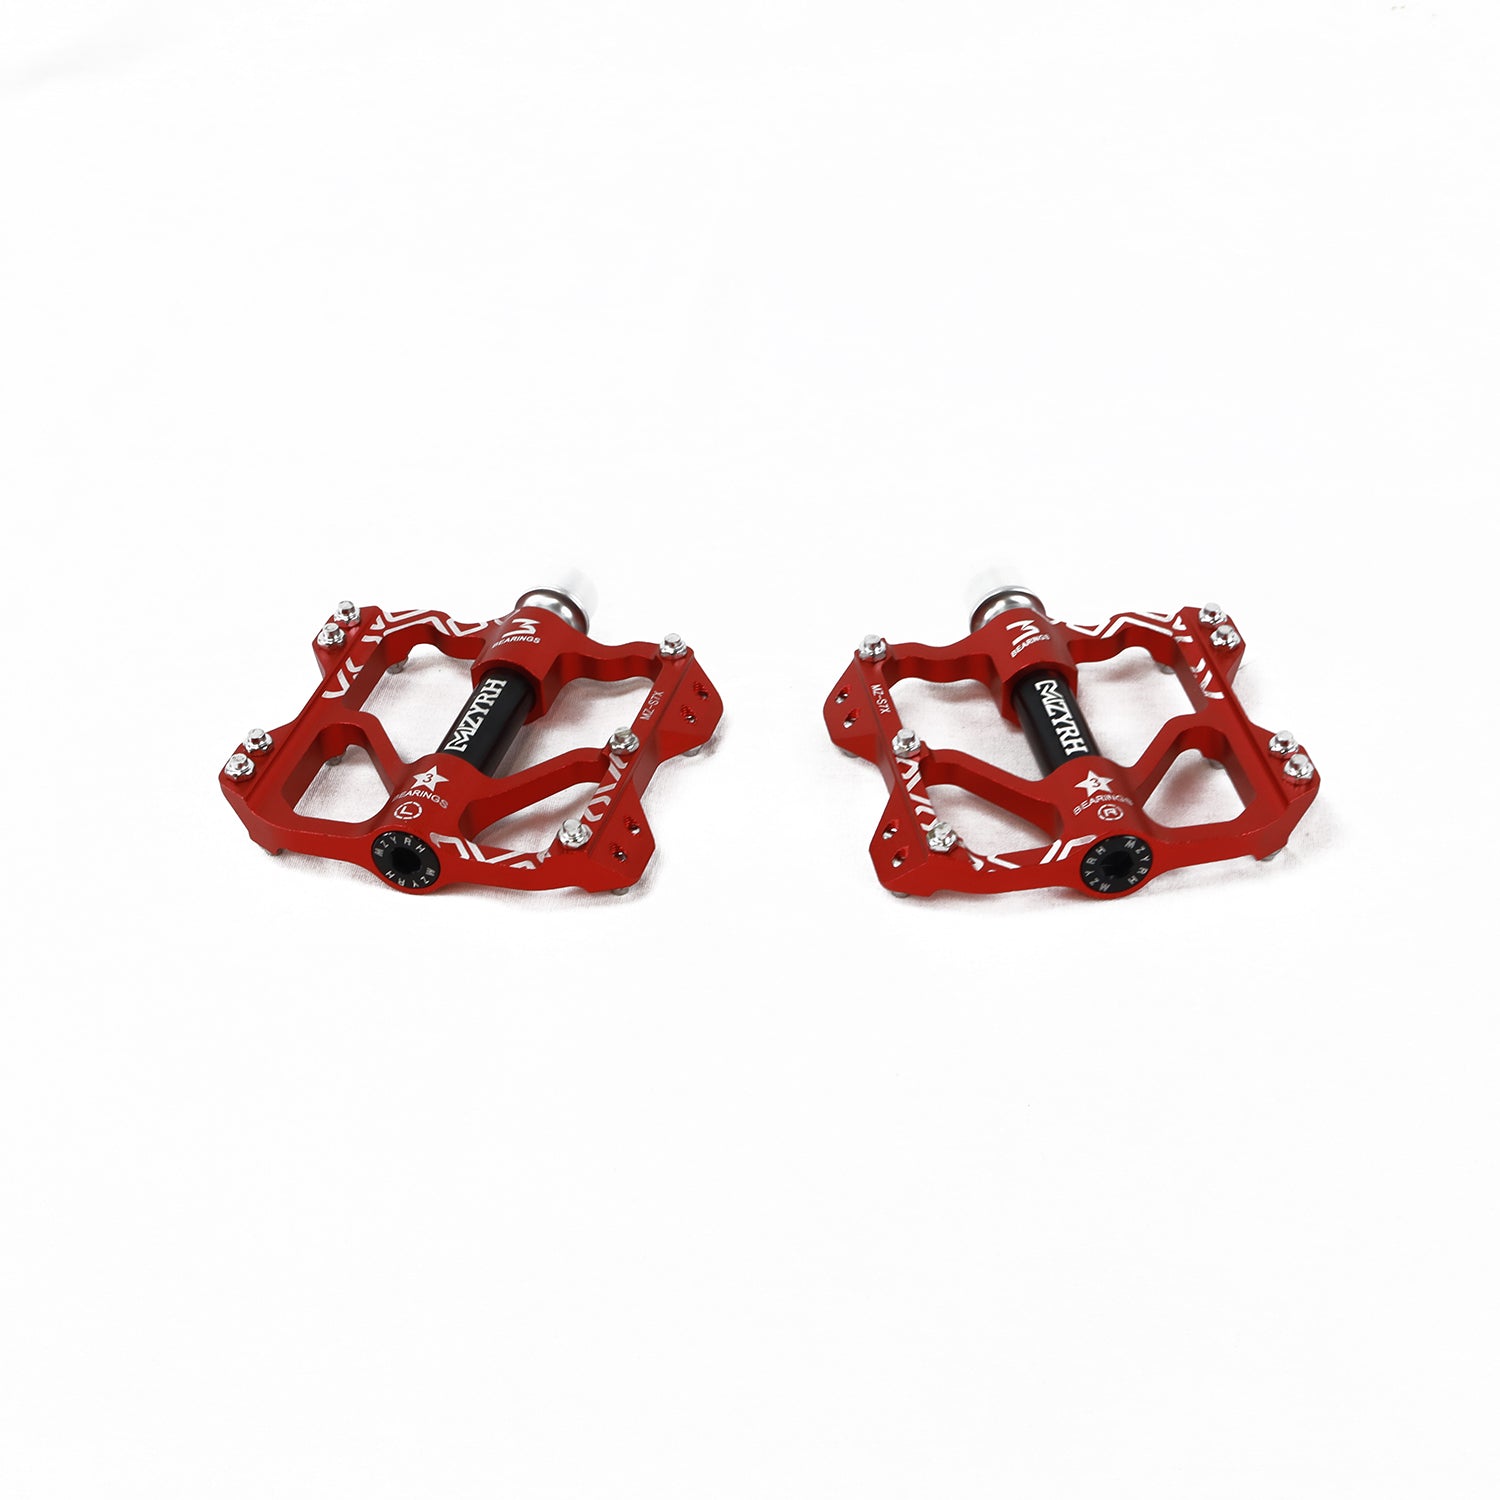 myzrh mountain bike pedals red 